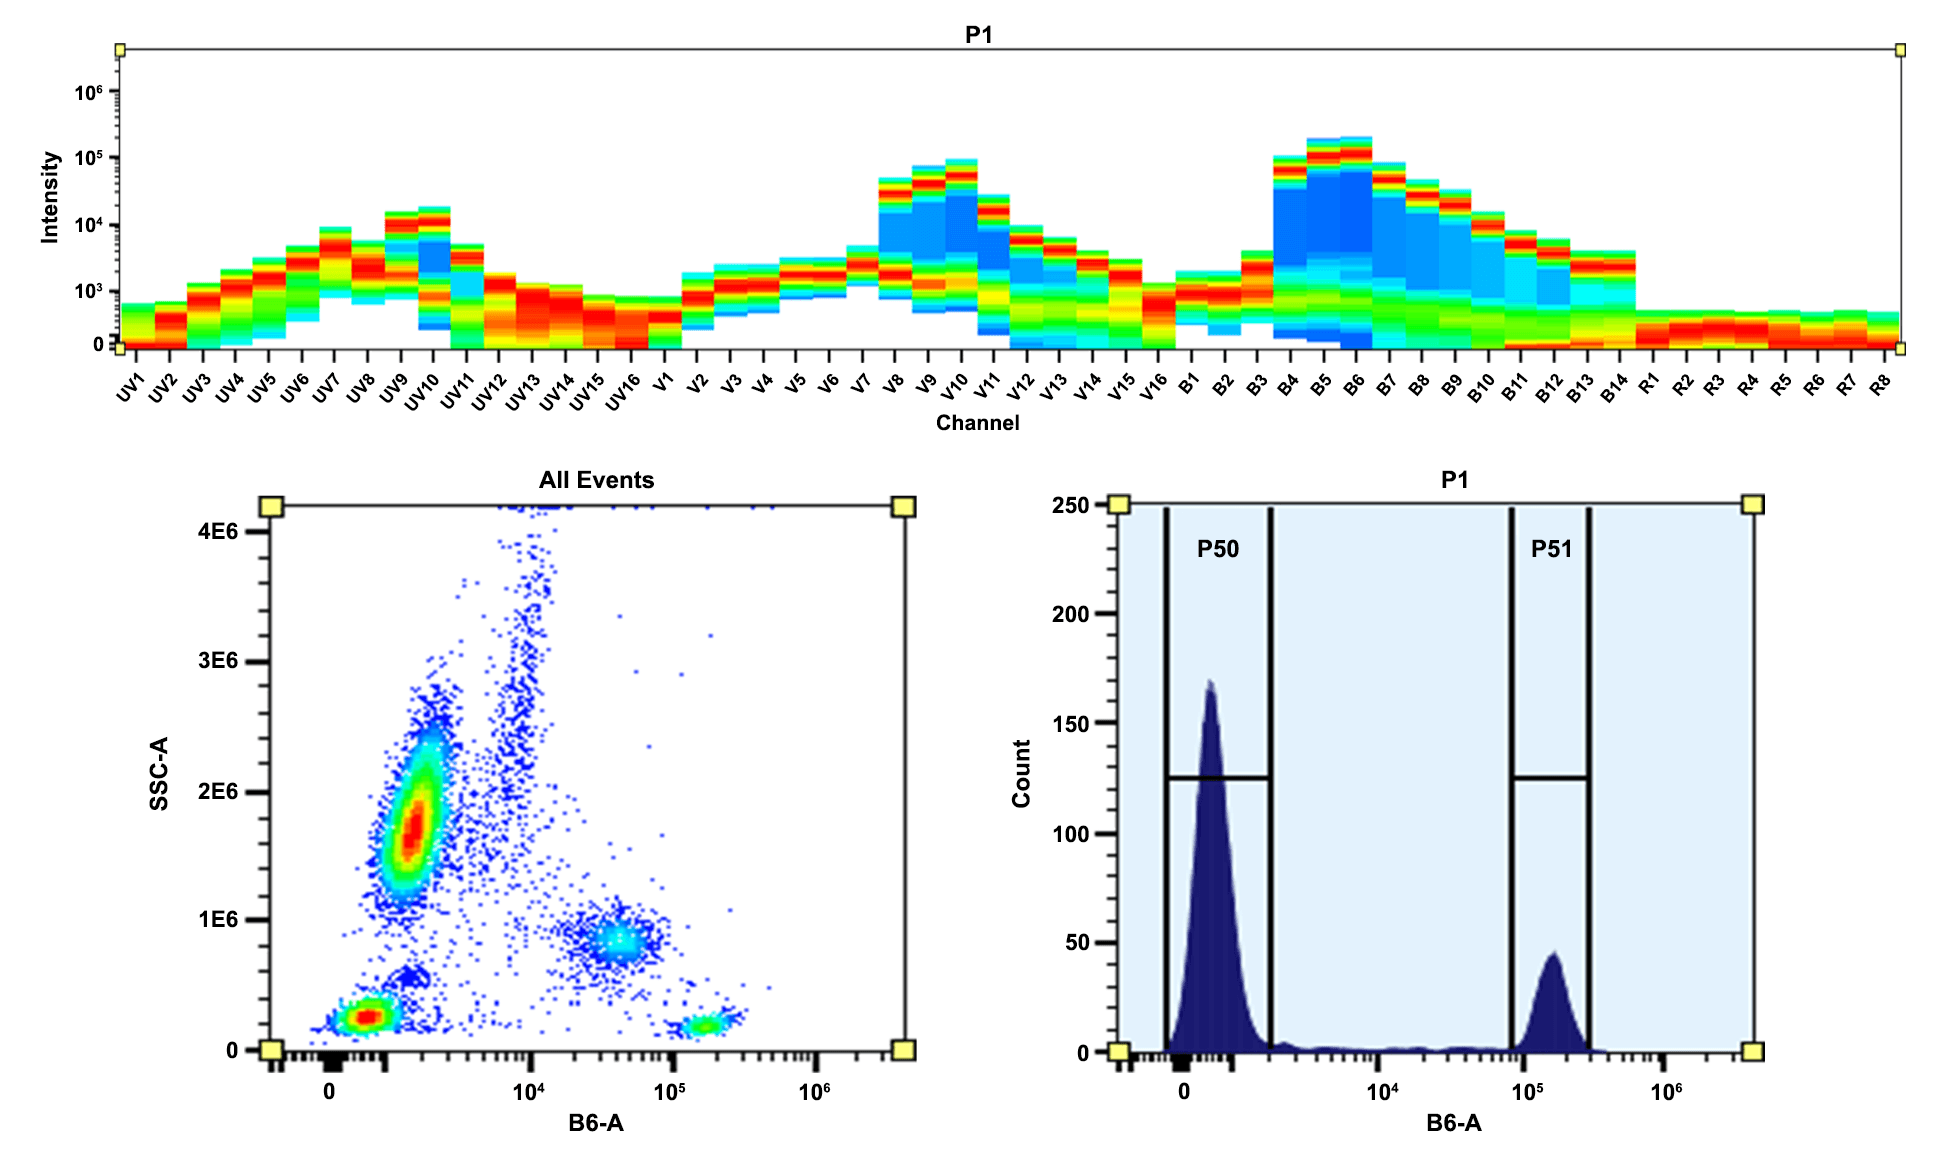 Top) Spectral pattern was generated using a 4-laser spectral cytometer. Spatially offset lasers (355 nm, 405 nm, 488 nm, and 640 nm) were used to create four distinct emission profiles, then, when combined, yielded the overall spectral signature. Bottom) Flow cytometry analysis of PBMC stained with PE/iFlour® 594 anti-human CD4 *SK3* conjugate. The fluorescence signal was monitored using an Aurora flow cytometer in the PE/iFluor® 594 specific B6-A channel.